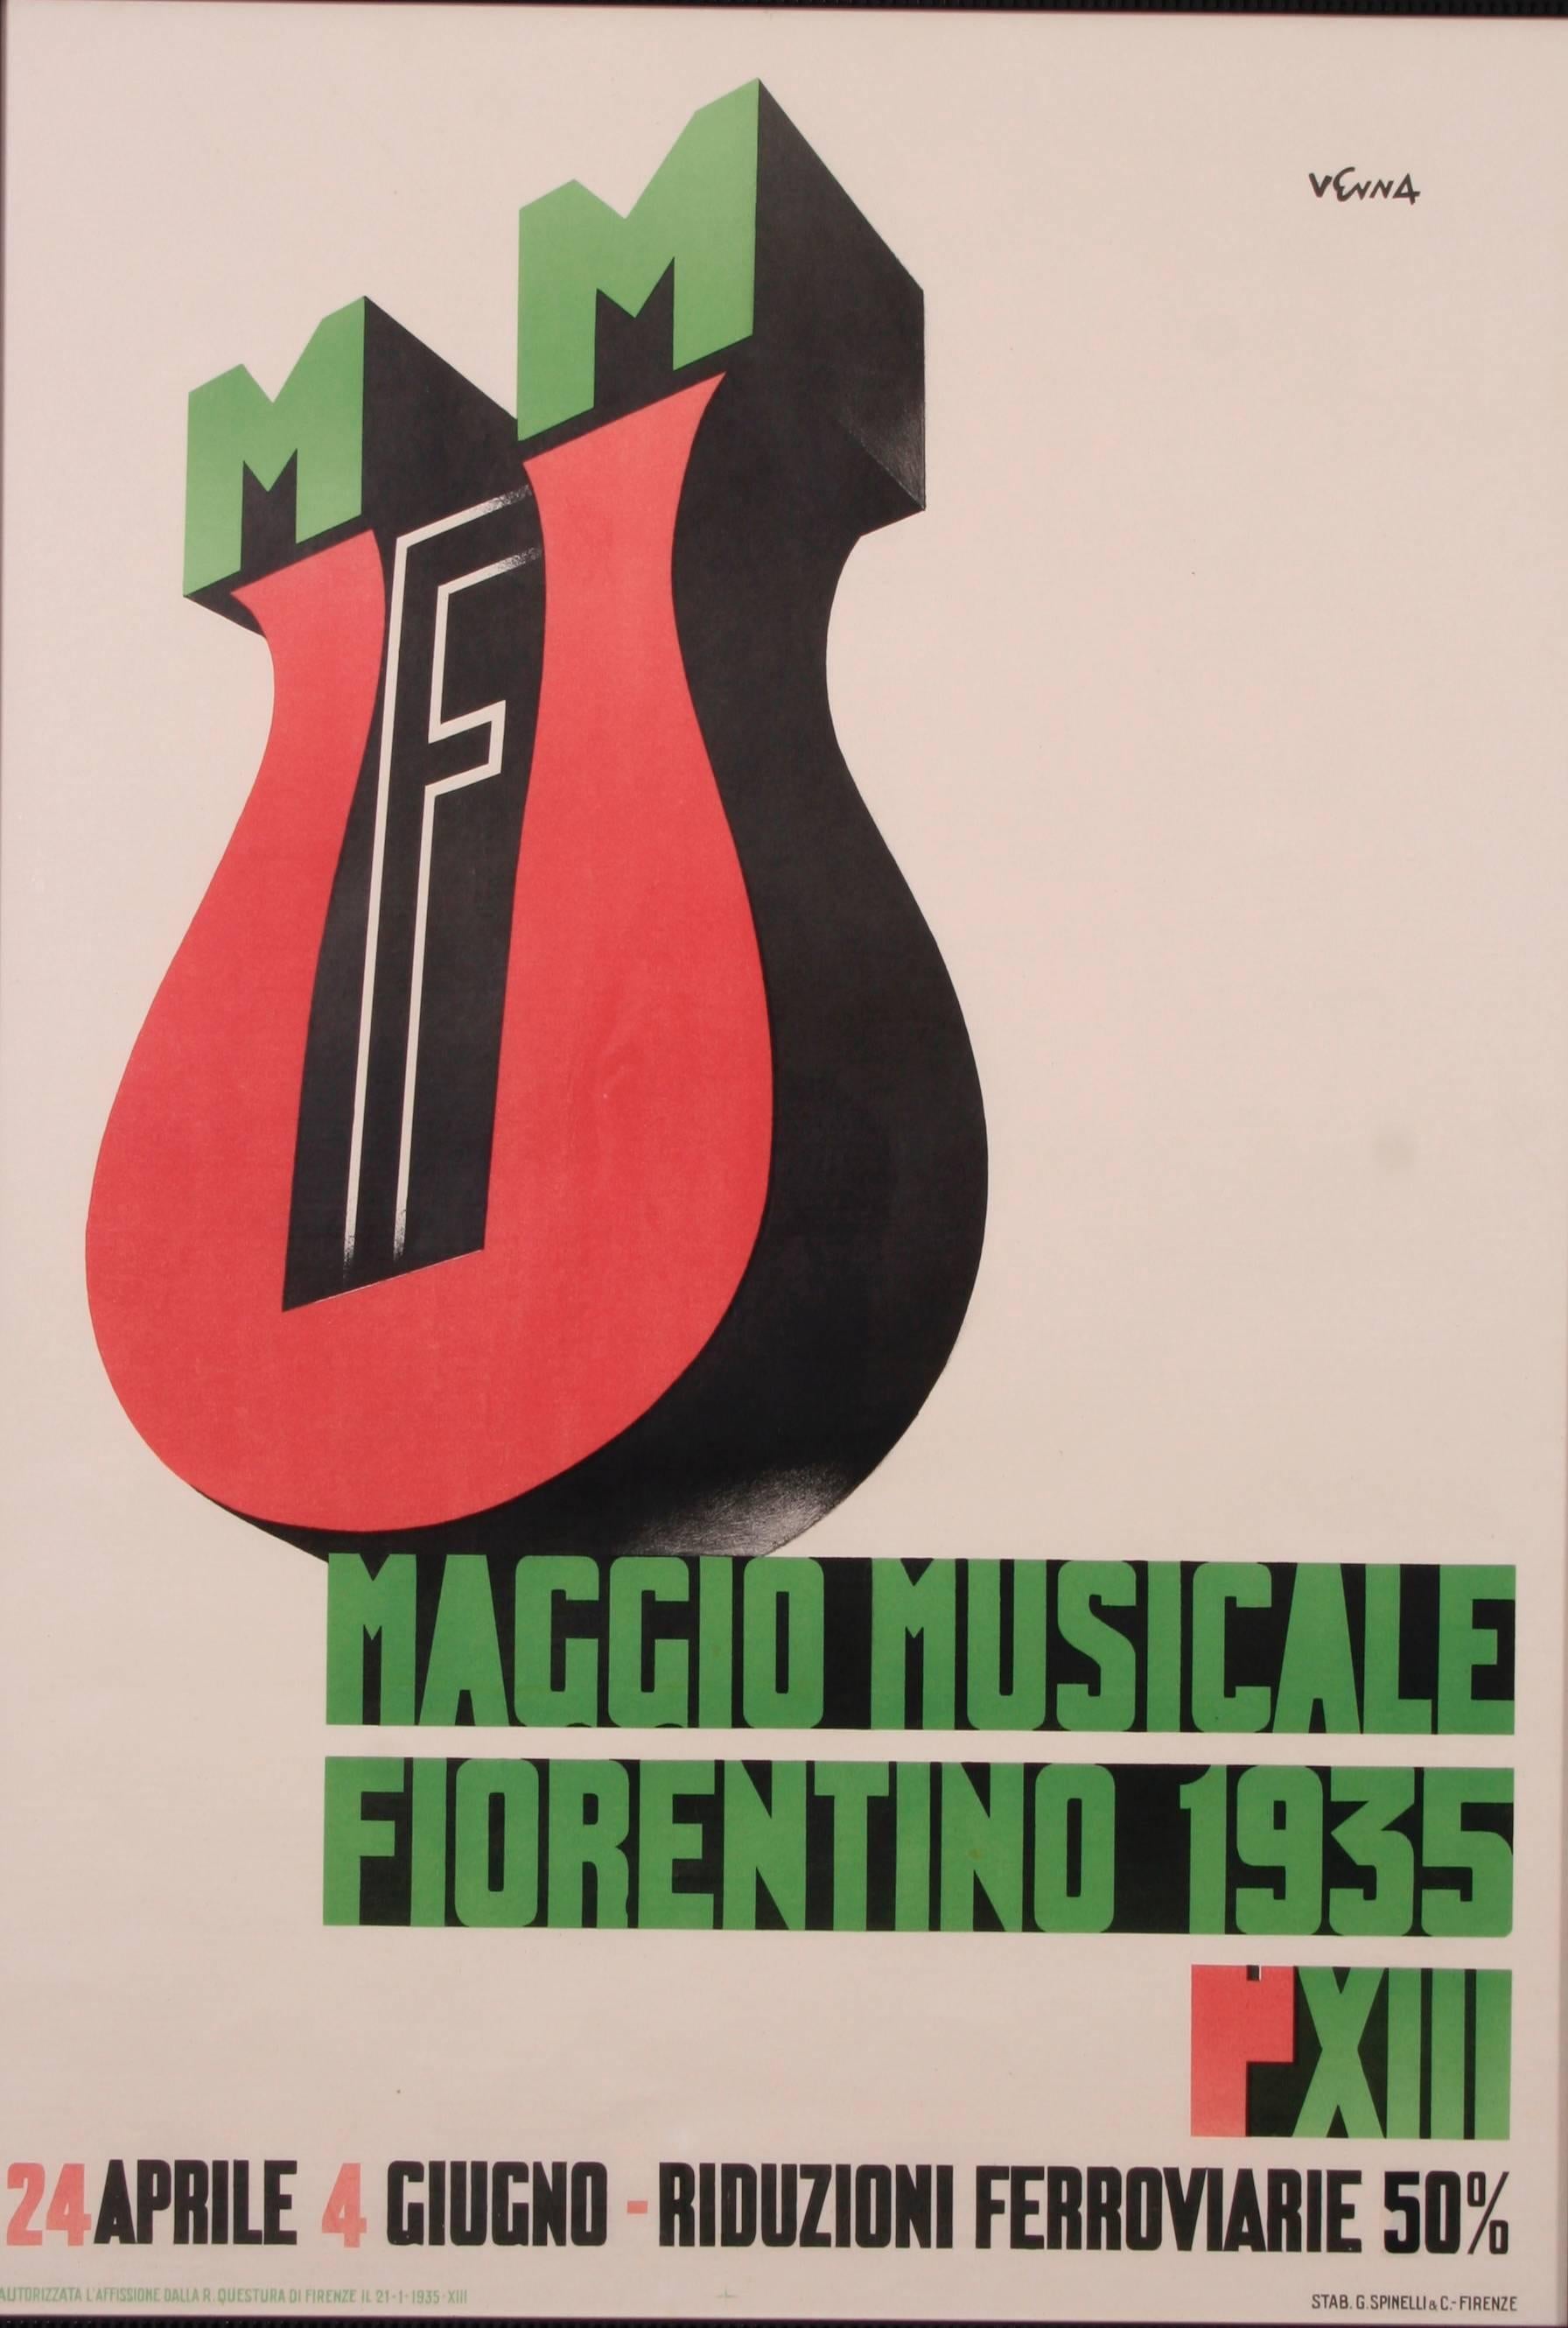 Italian "Futurist" style poster by Lucio Venna (pseudonym of Giuseppe Landsmann), 1935. This is an advertisement for the "Maggio Musicale Florentino," an annual musical festival in Florence which began in 1933 and continues to the present day. The